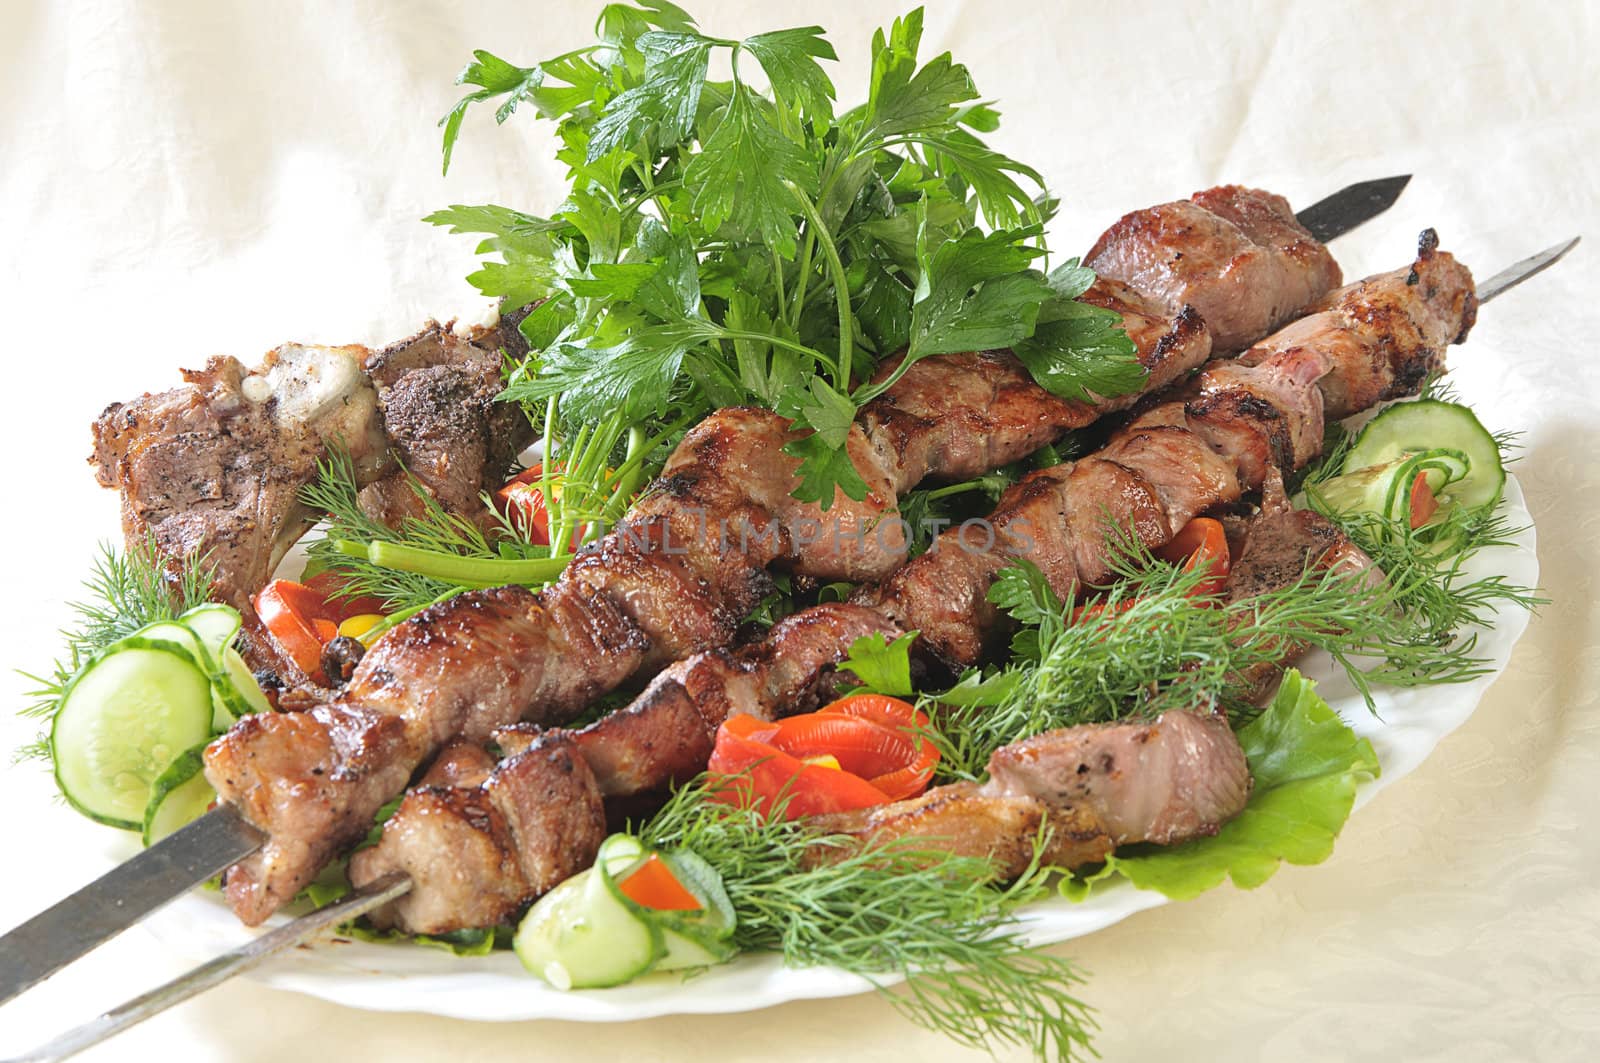 Lamb on skewers by dyoma